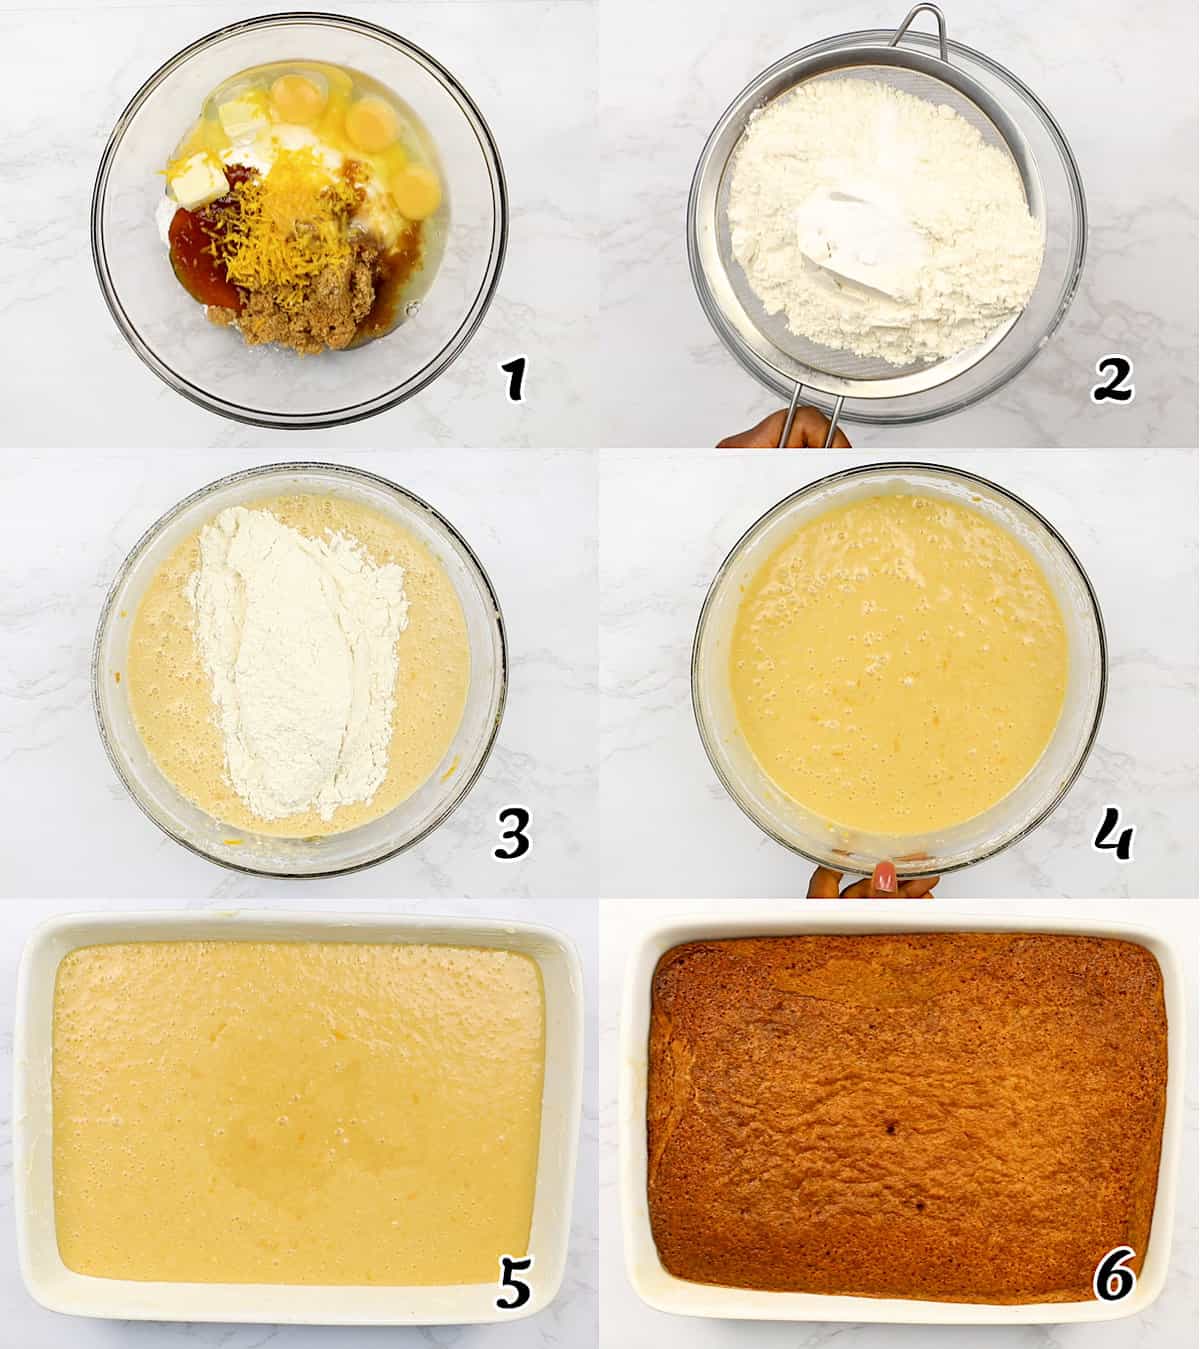 Make the cake, mix the wet ingredients, mix dry ingredients, then bake 